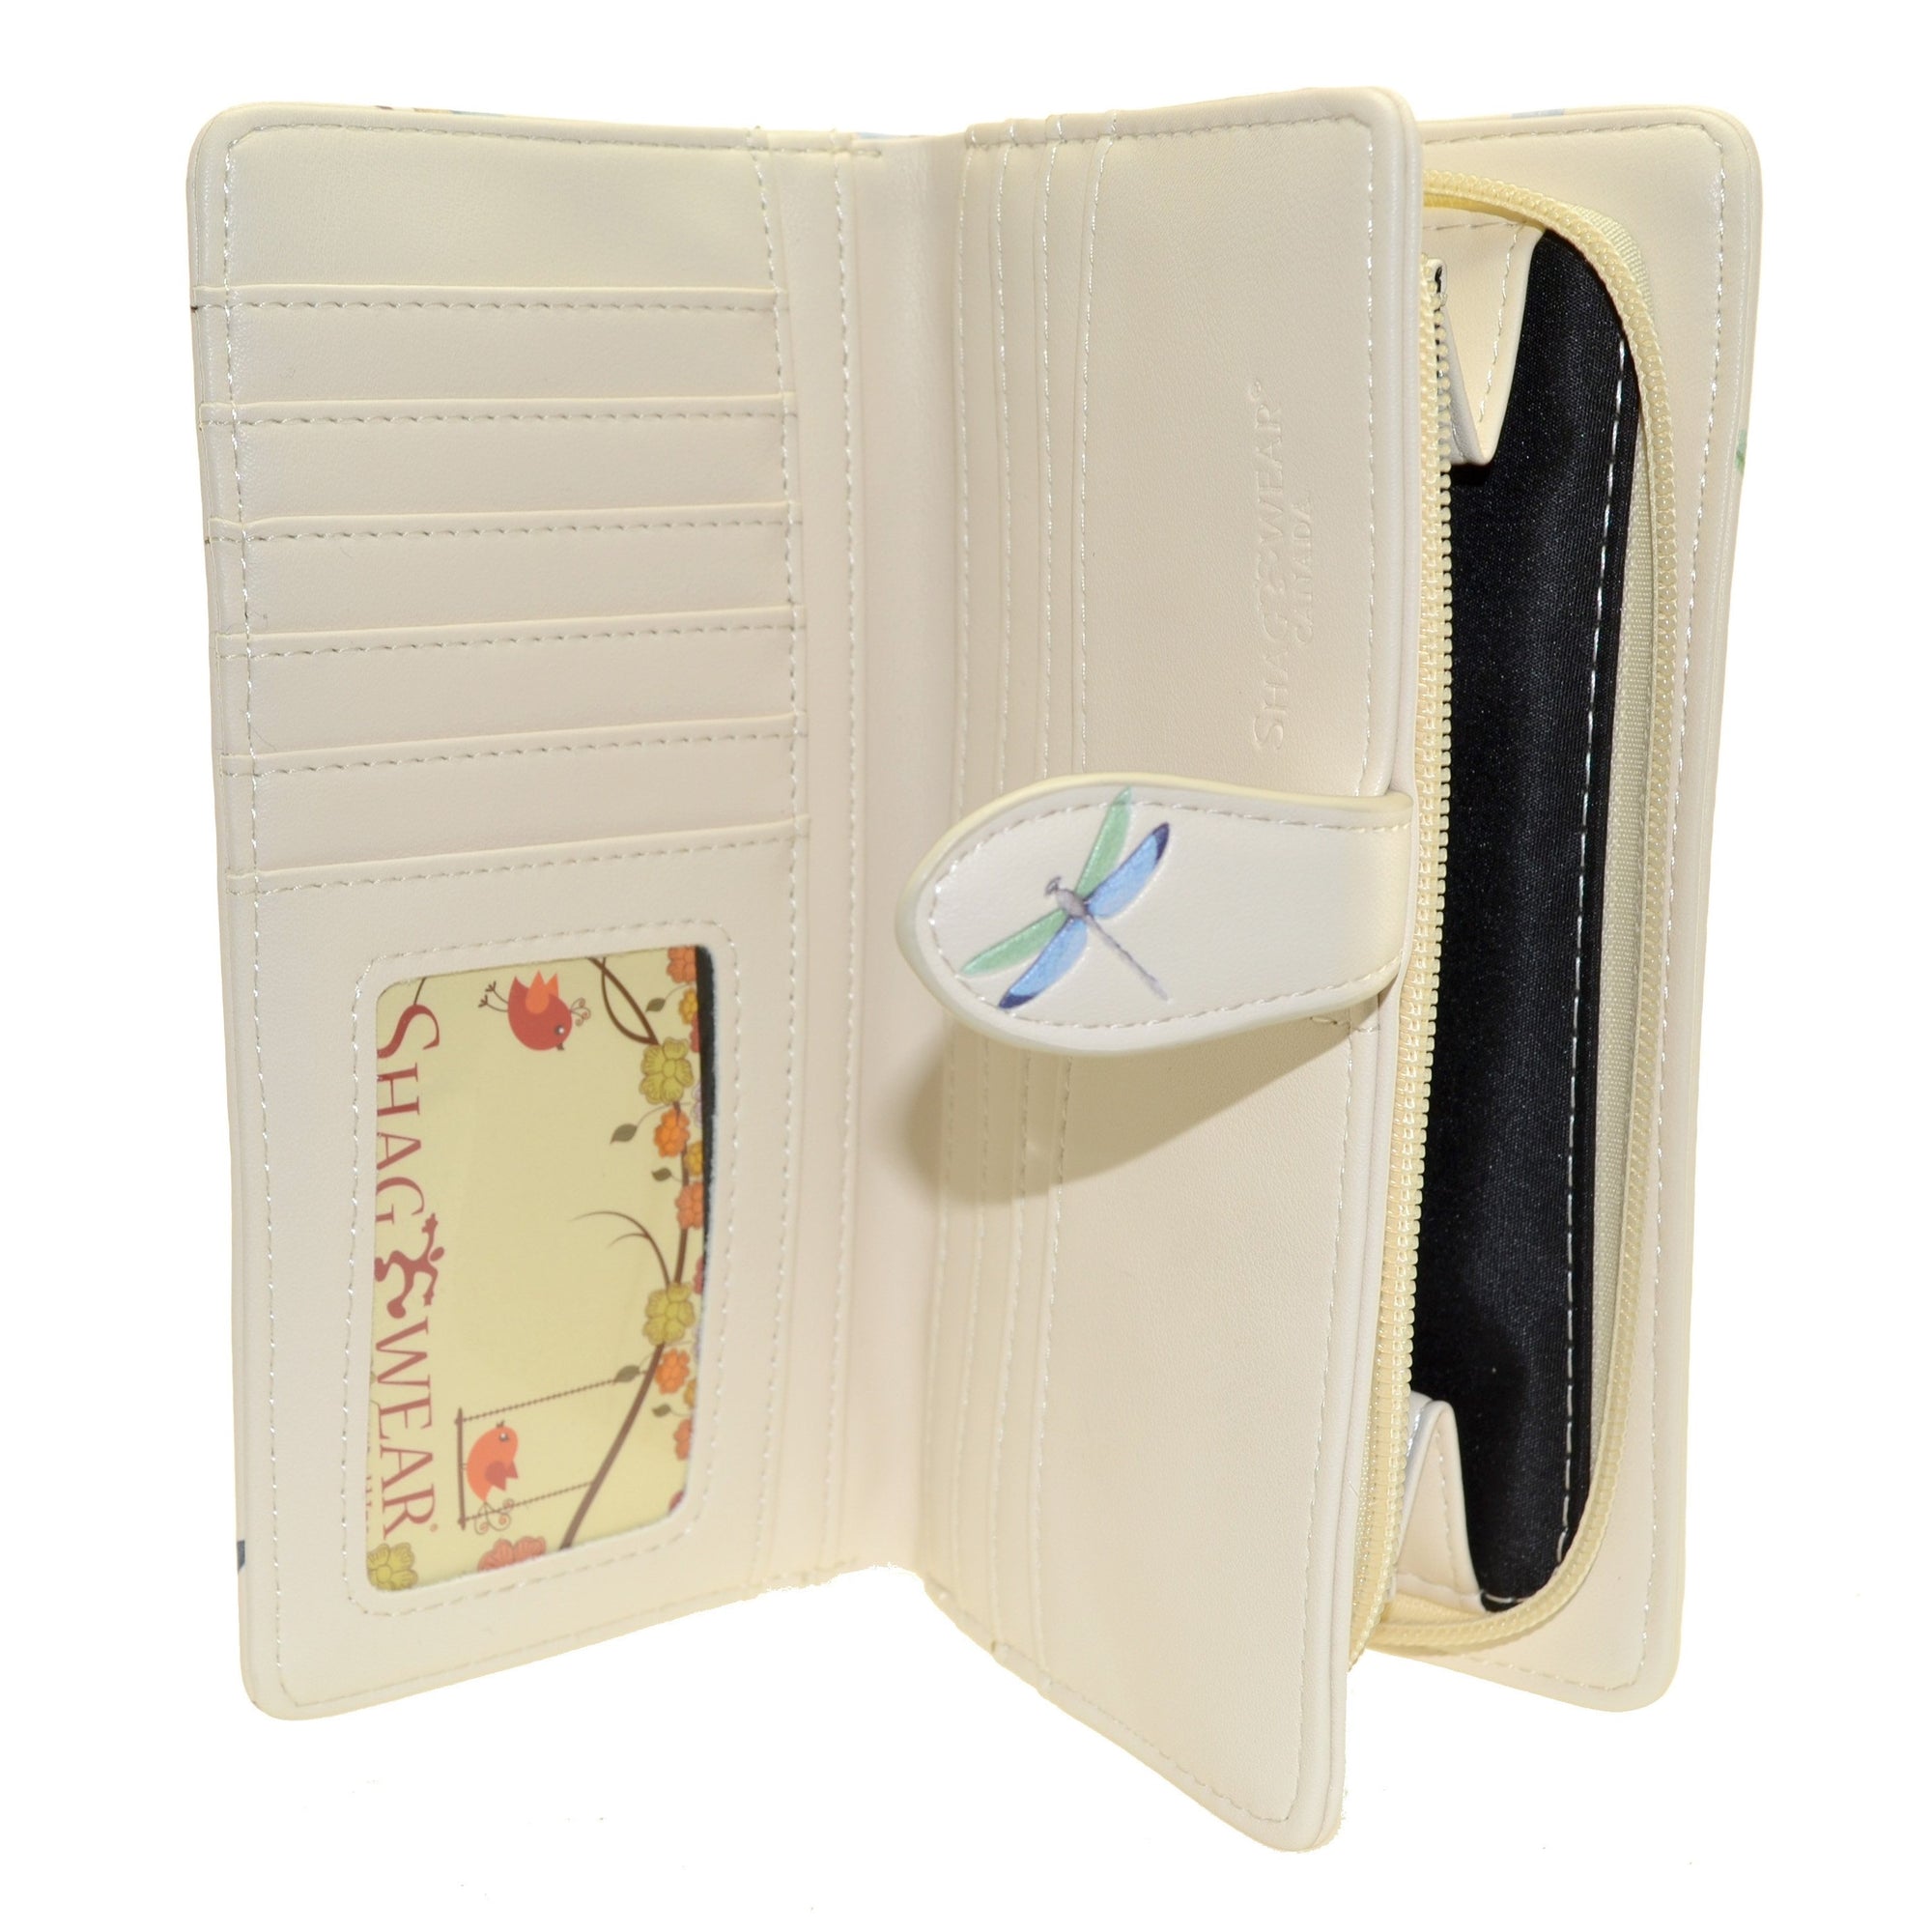 Dragonfly Crème Wallet - Large